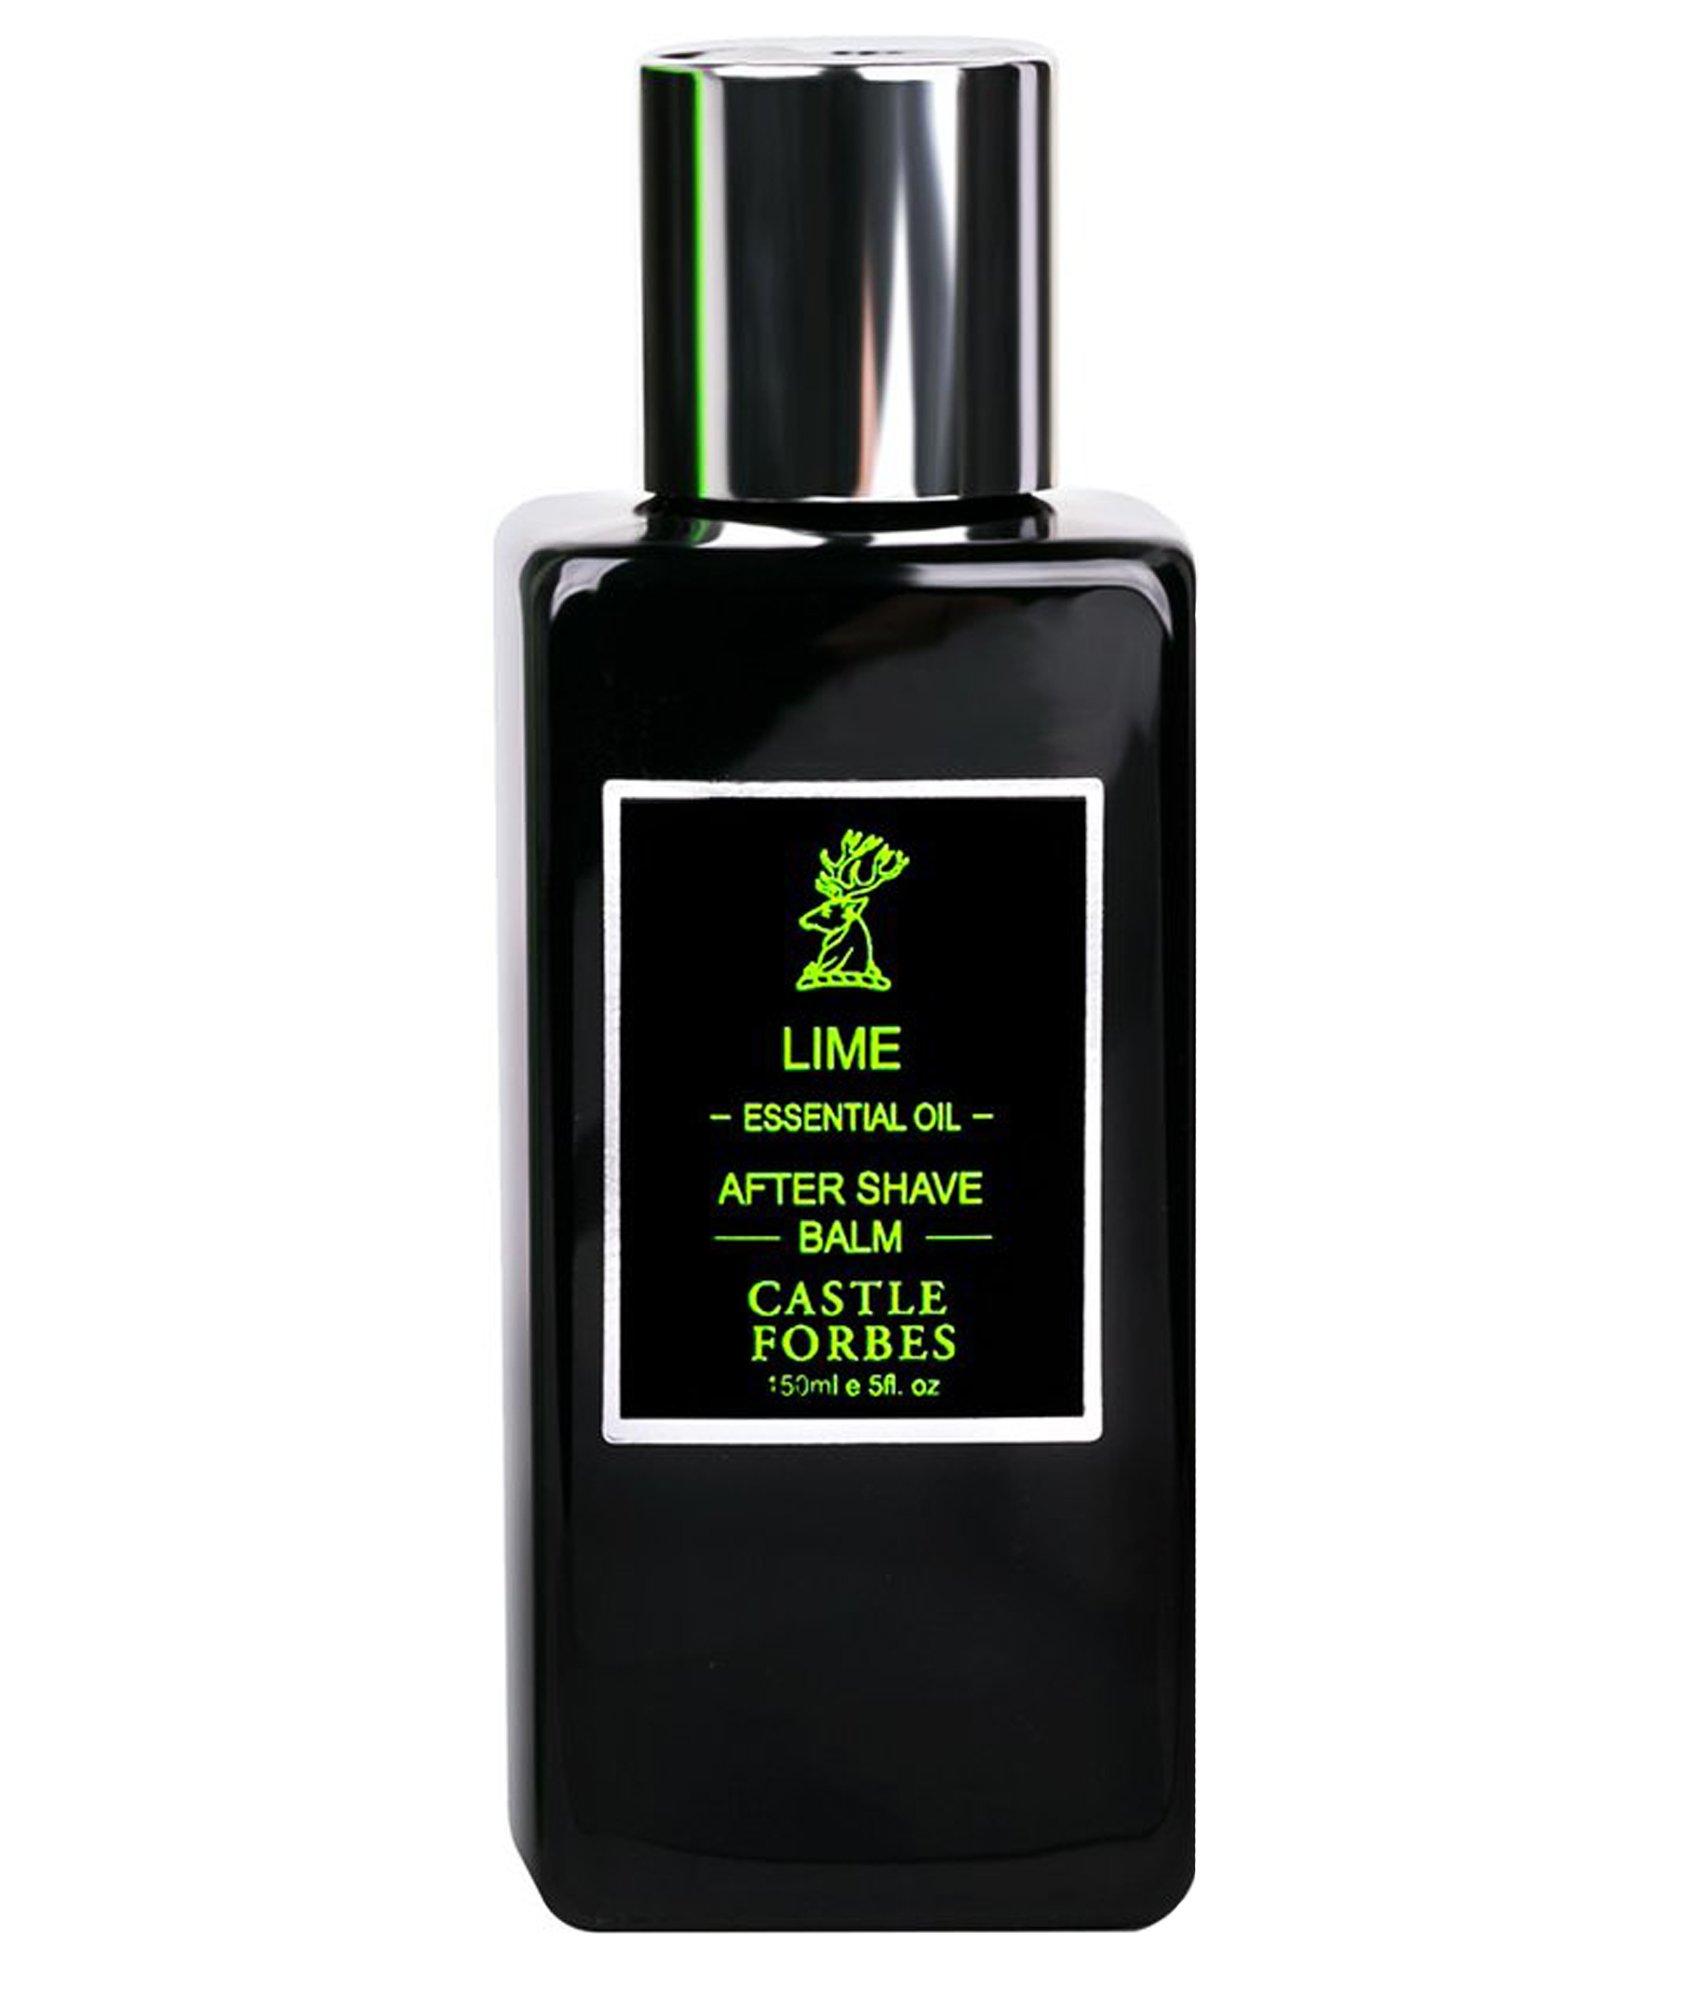 Lime Aftershave Balm image 0